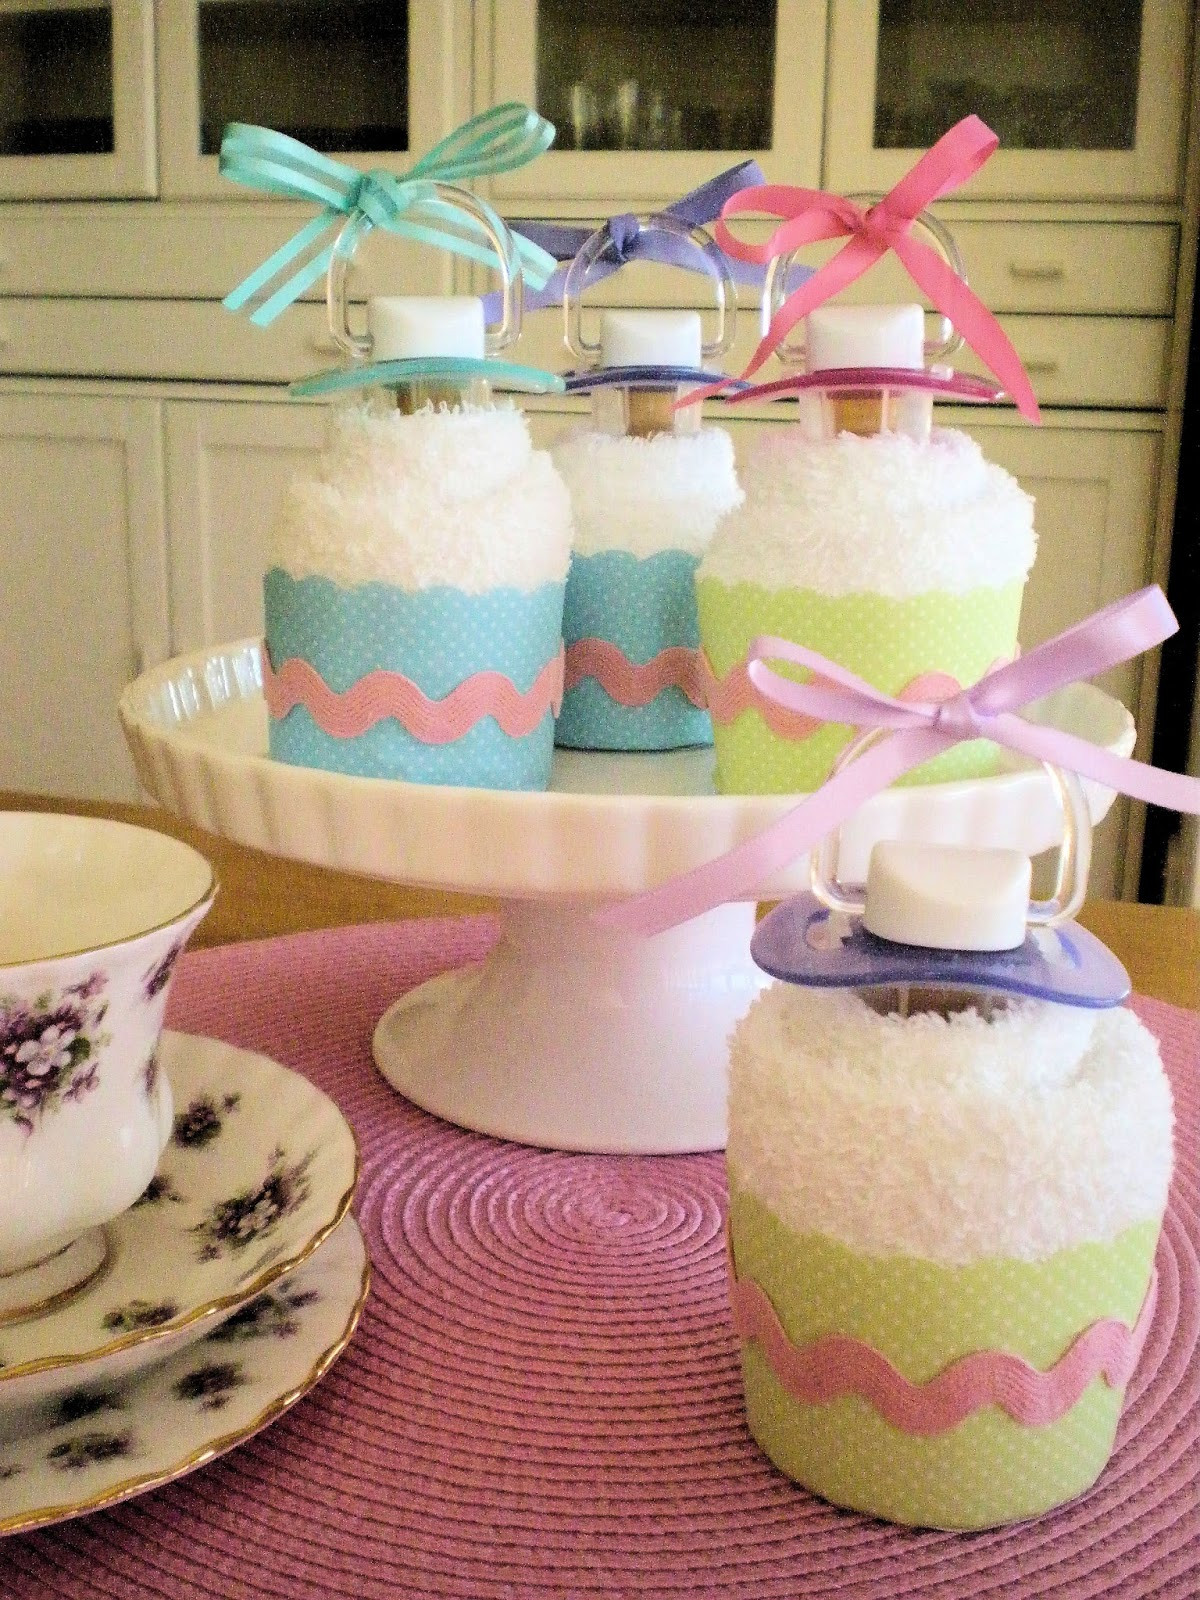 Gift Ideas For Sugar Baby
 Baby Shower Gifts to Make A Spoonful of Sugar